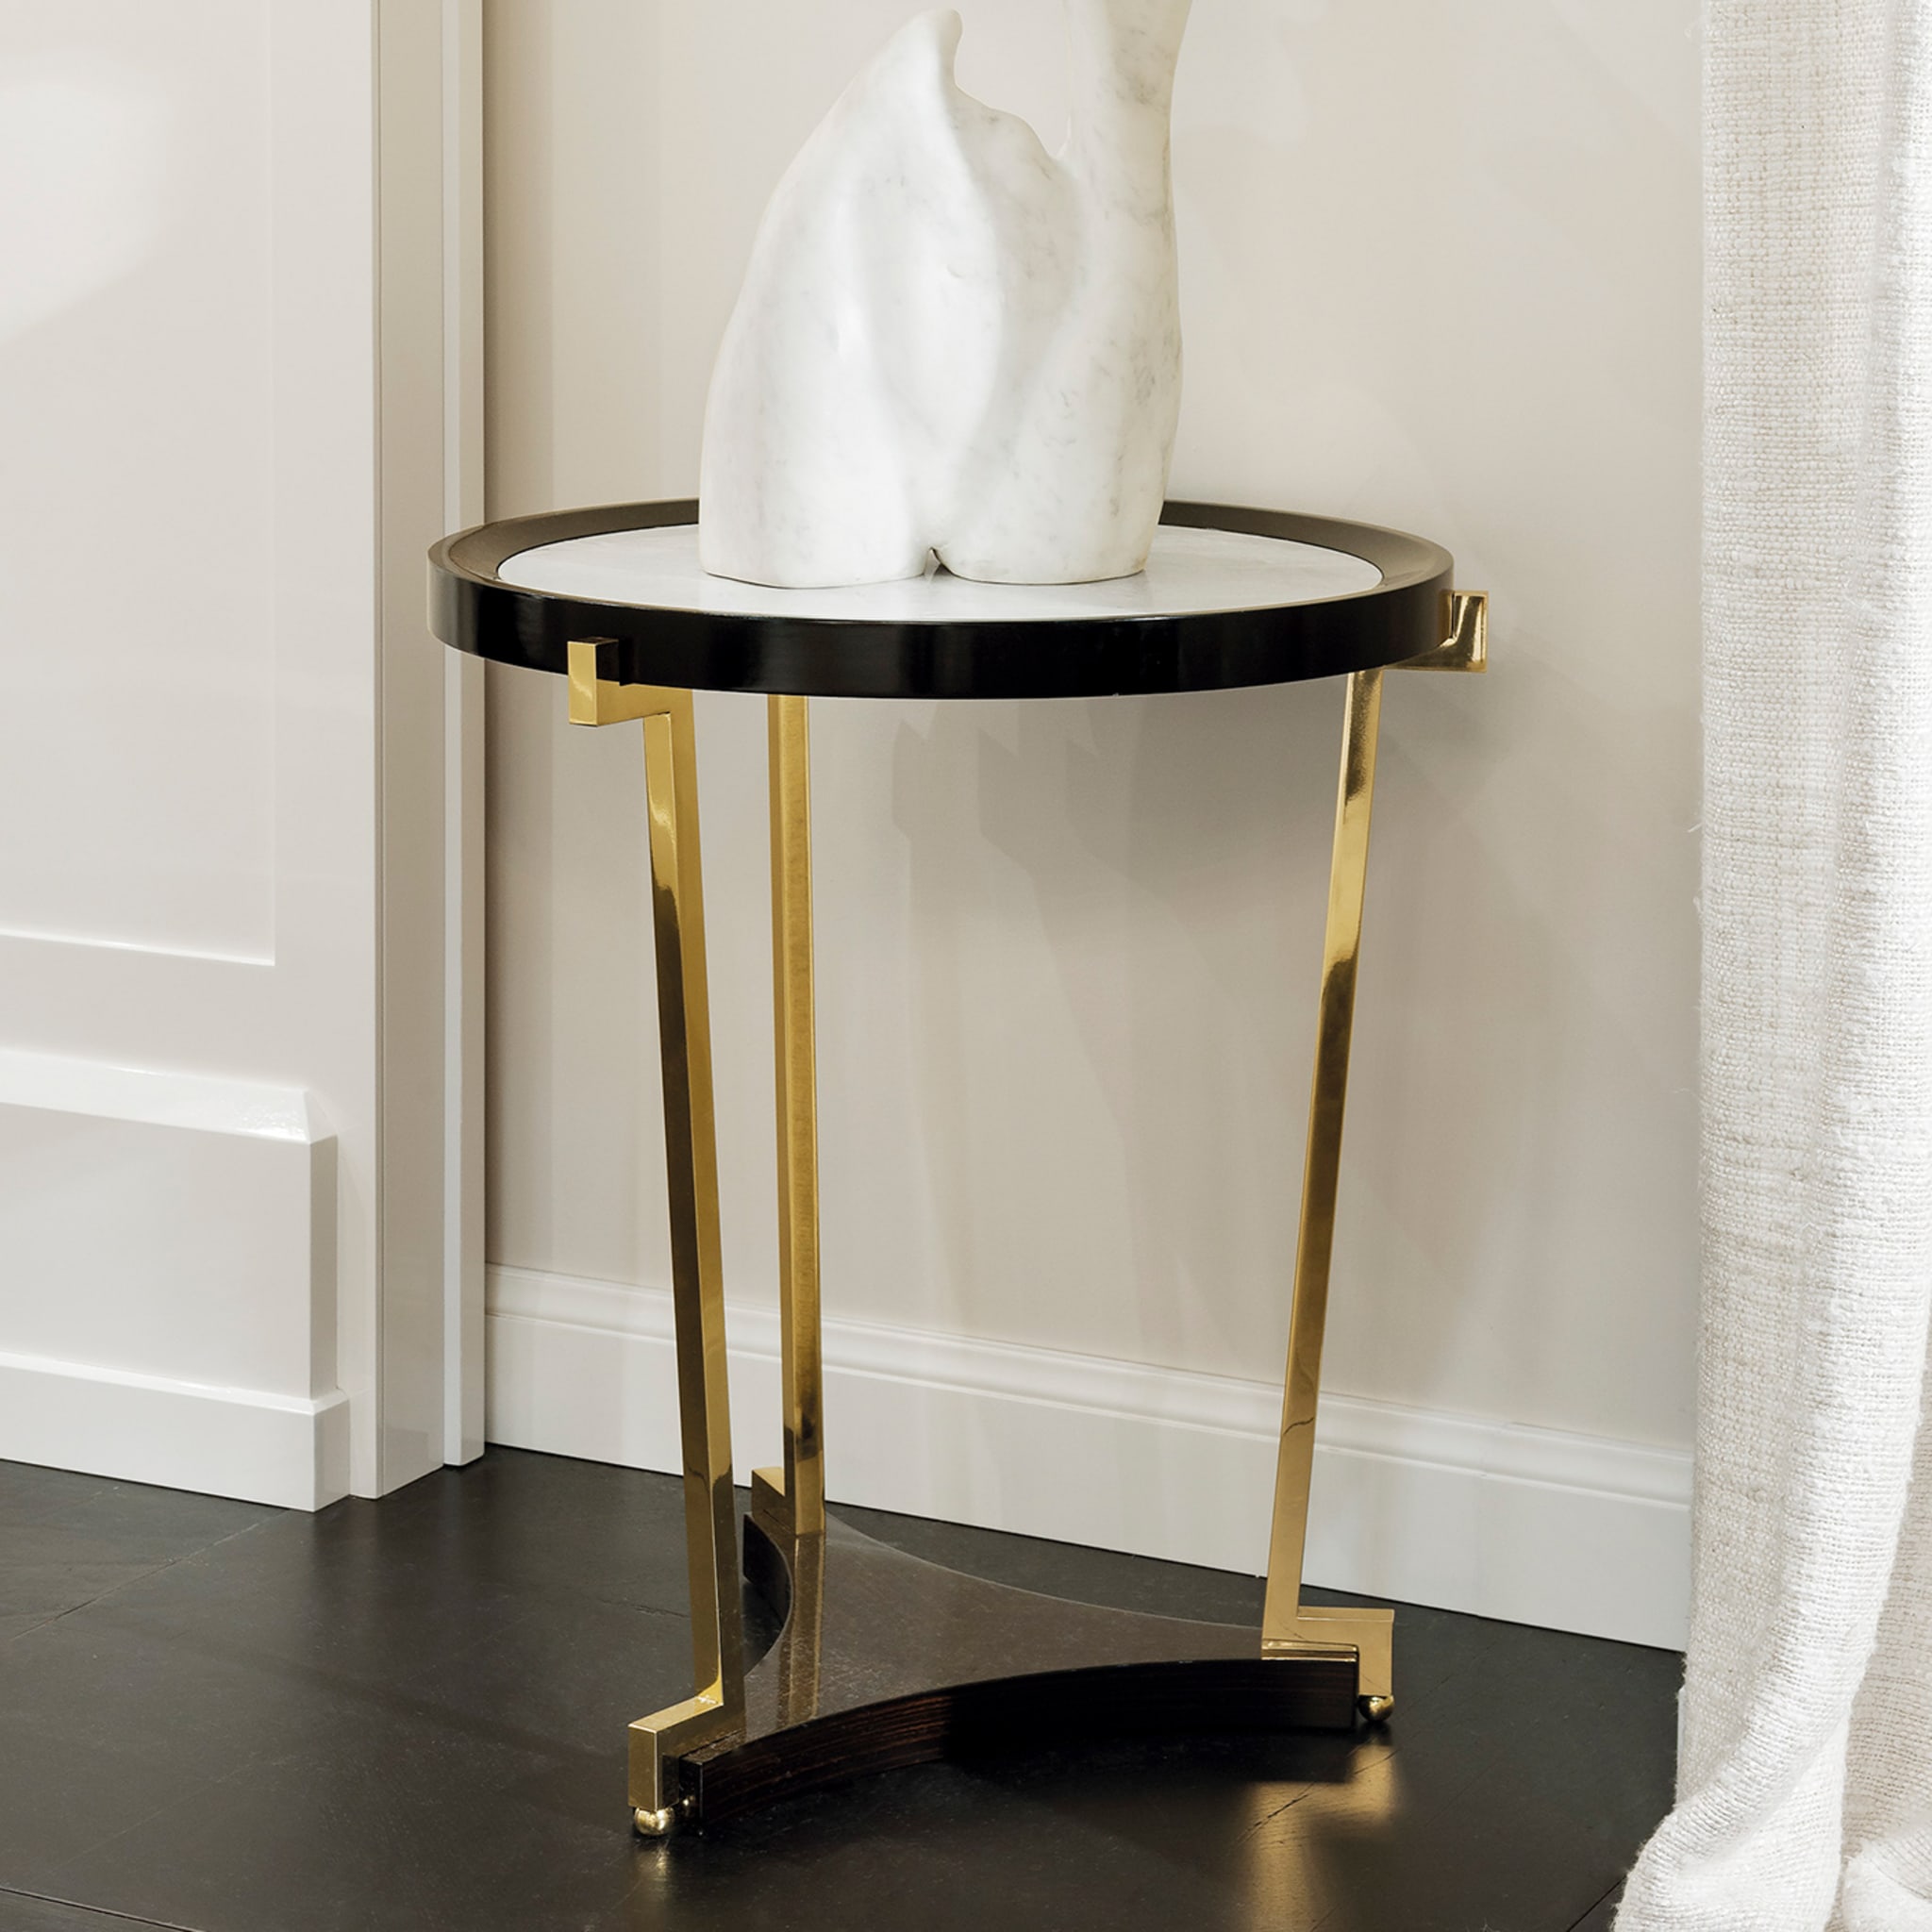 Ebony and Brass Side Table - Alternative view 1